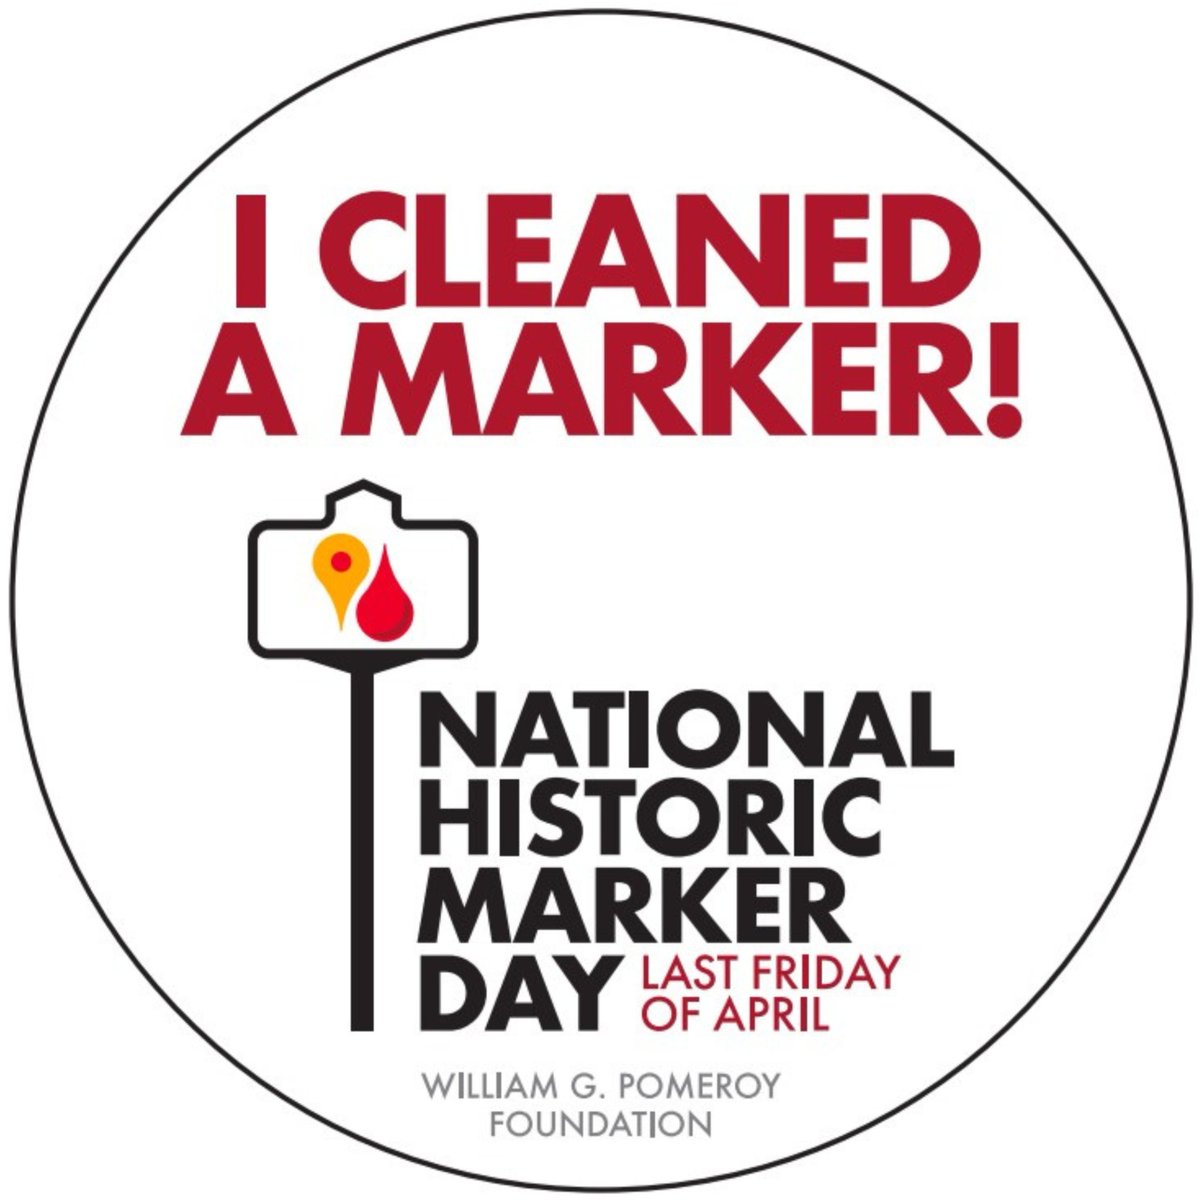 Did you know you can receive free stickers when you sign up as a #NationalHistoricMarkerDay volunteer? Complete the registration form on our website: tinyurl.com/mryuf4zw. Sticker supplies are limited. The deadline for signing up to receive stickers is Friday, April 19.